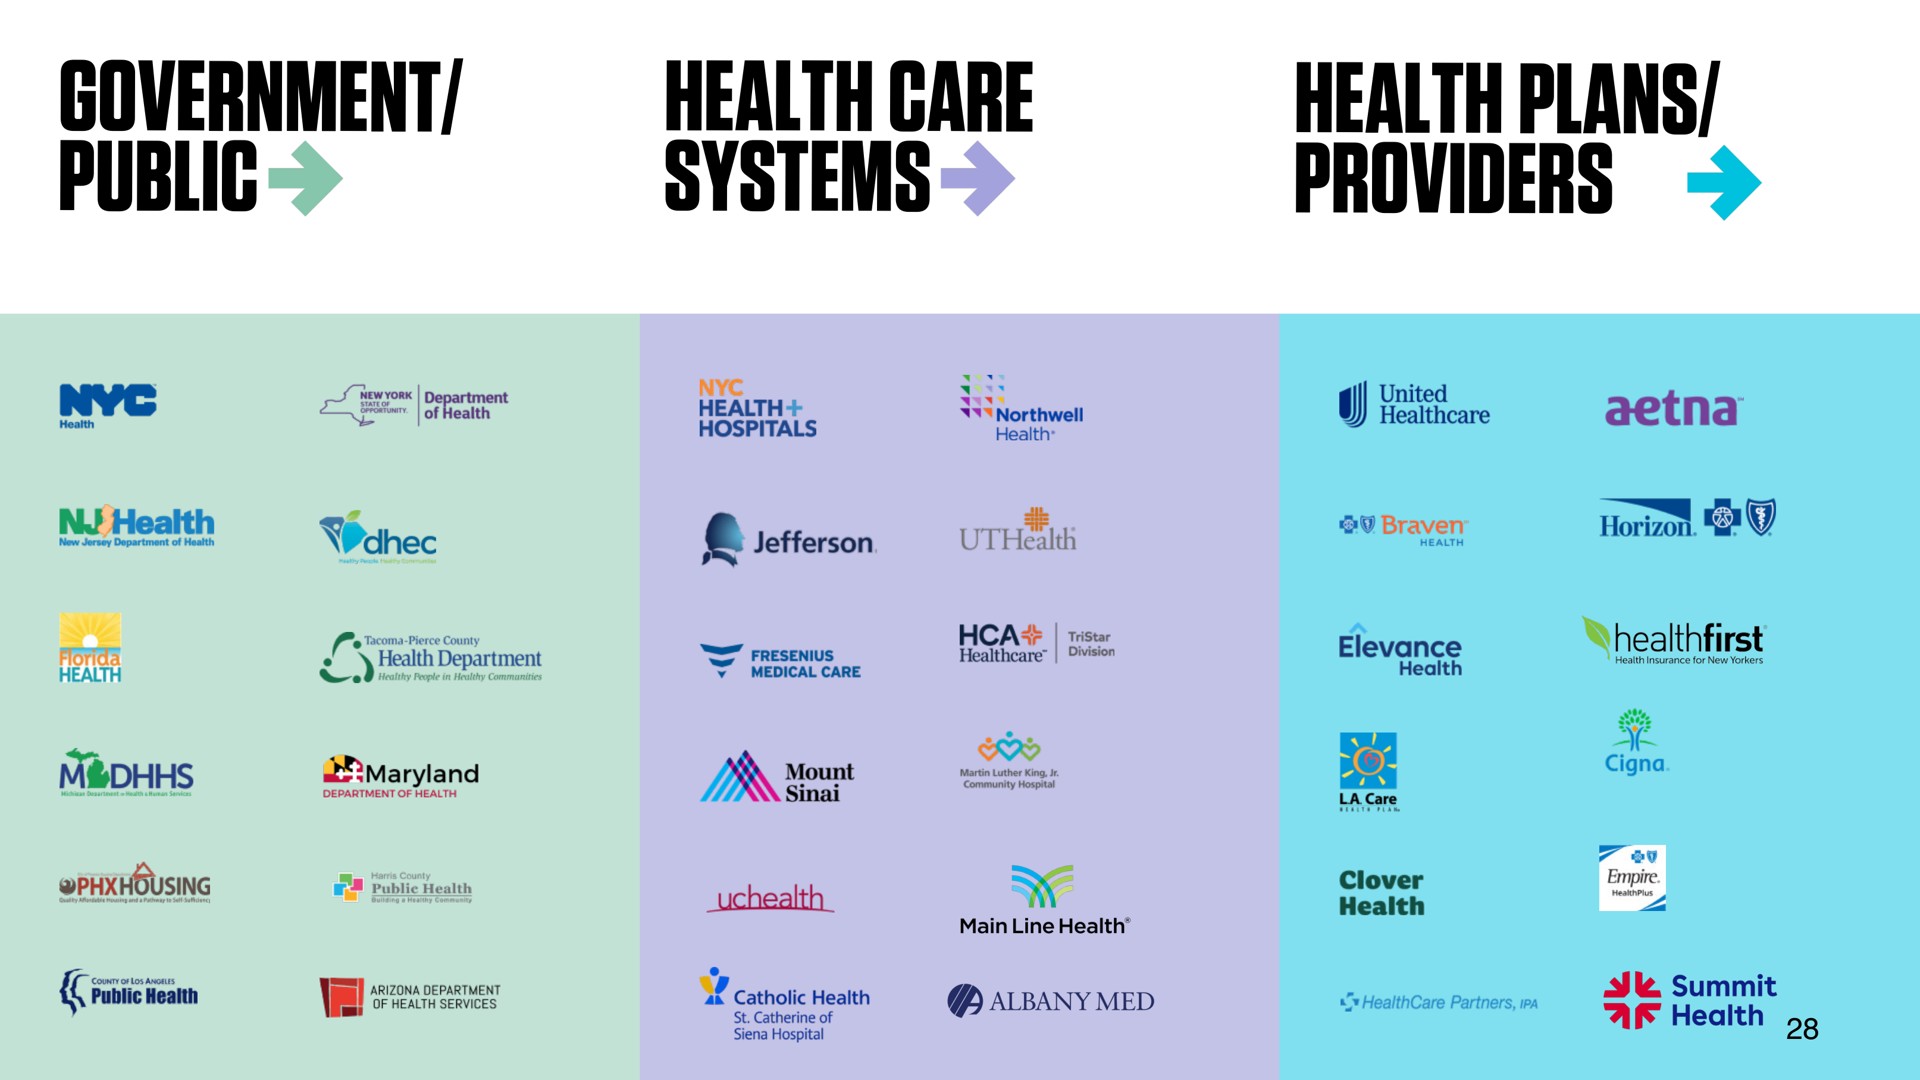 government public health gare systems health plans providers pattee | DocGo